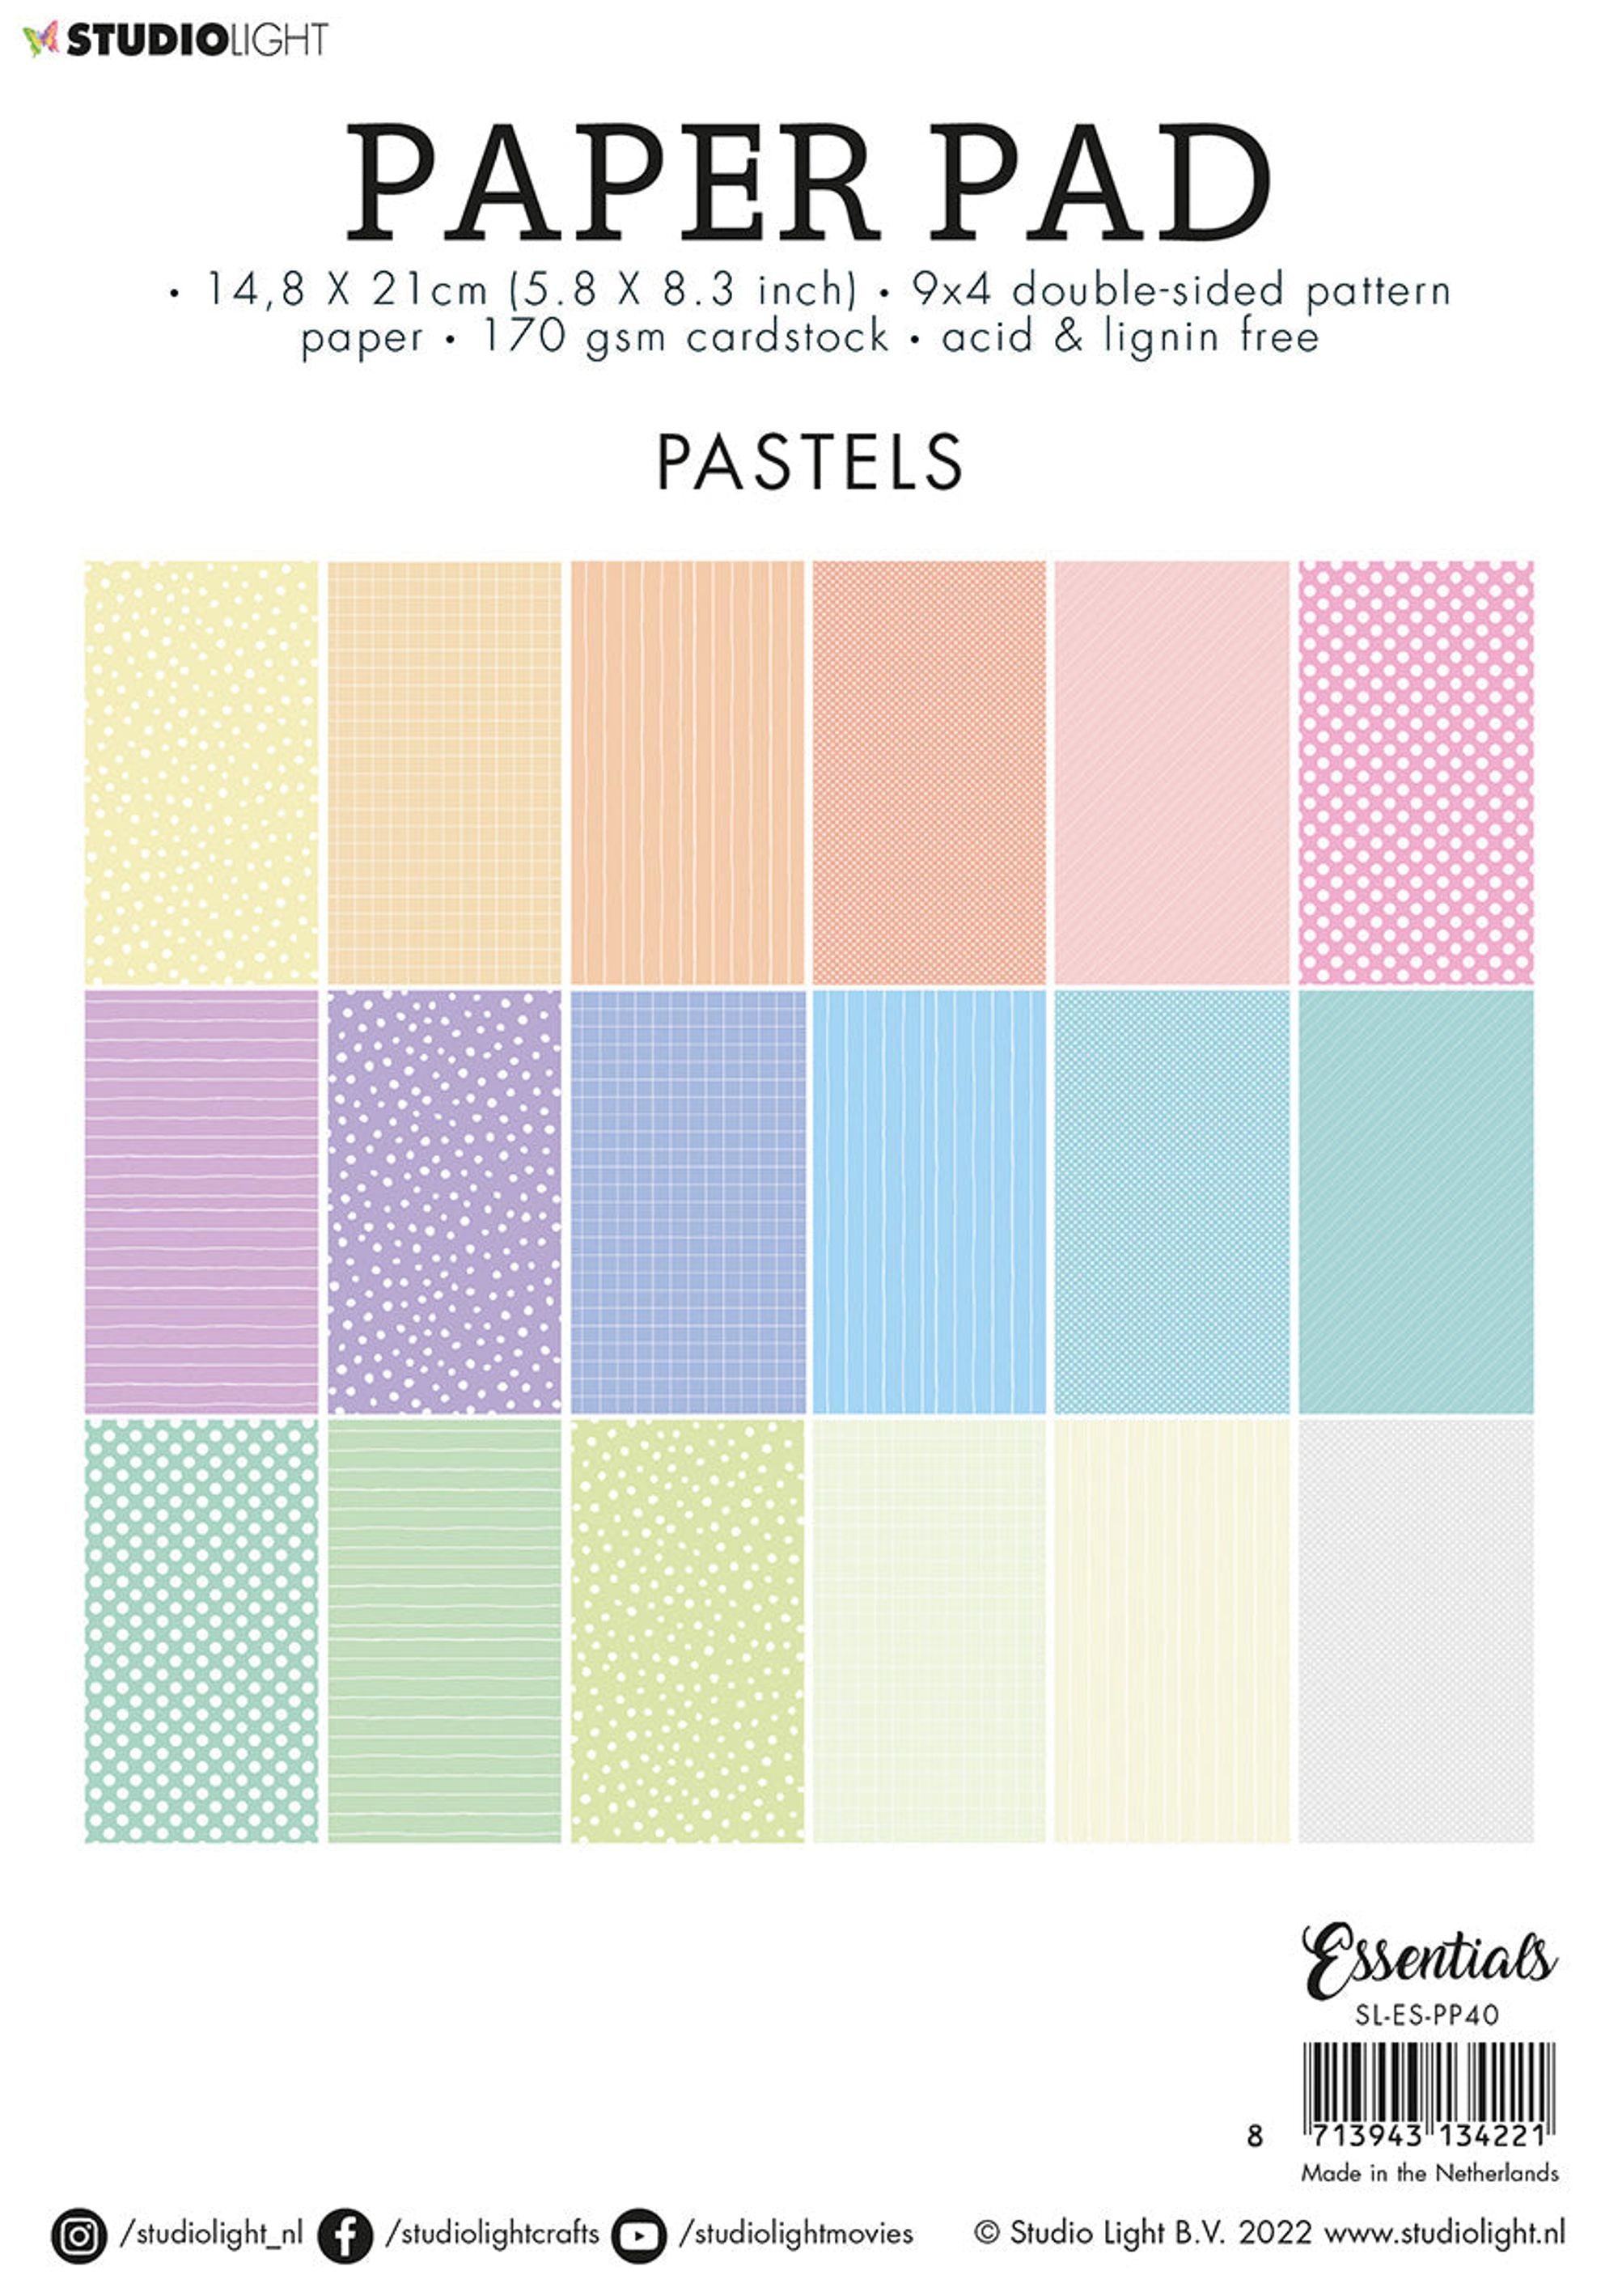 SL Paper Pad Double Sided Unicolor Patterns Pastel Essentials 210x148x9mm 36 SH nr.40